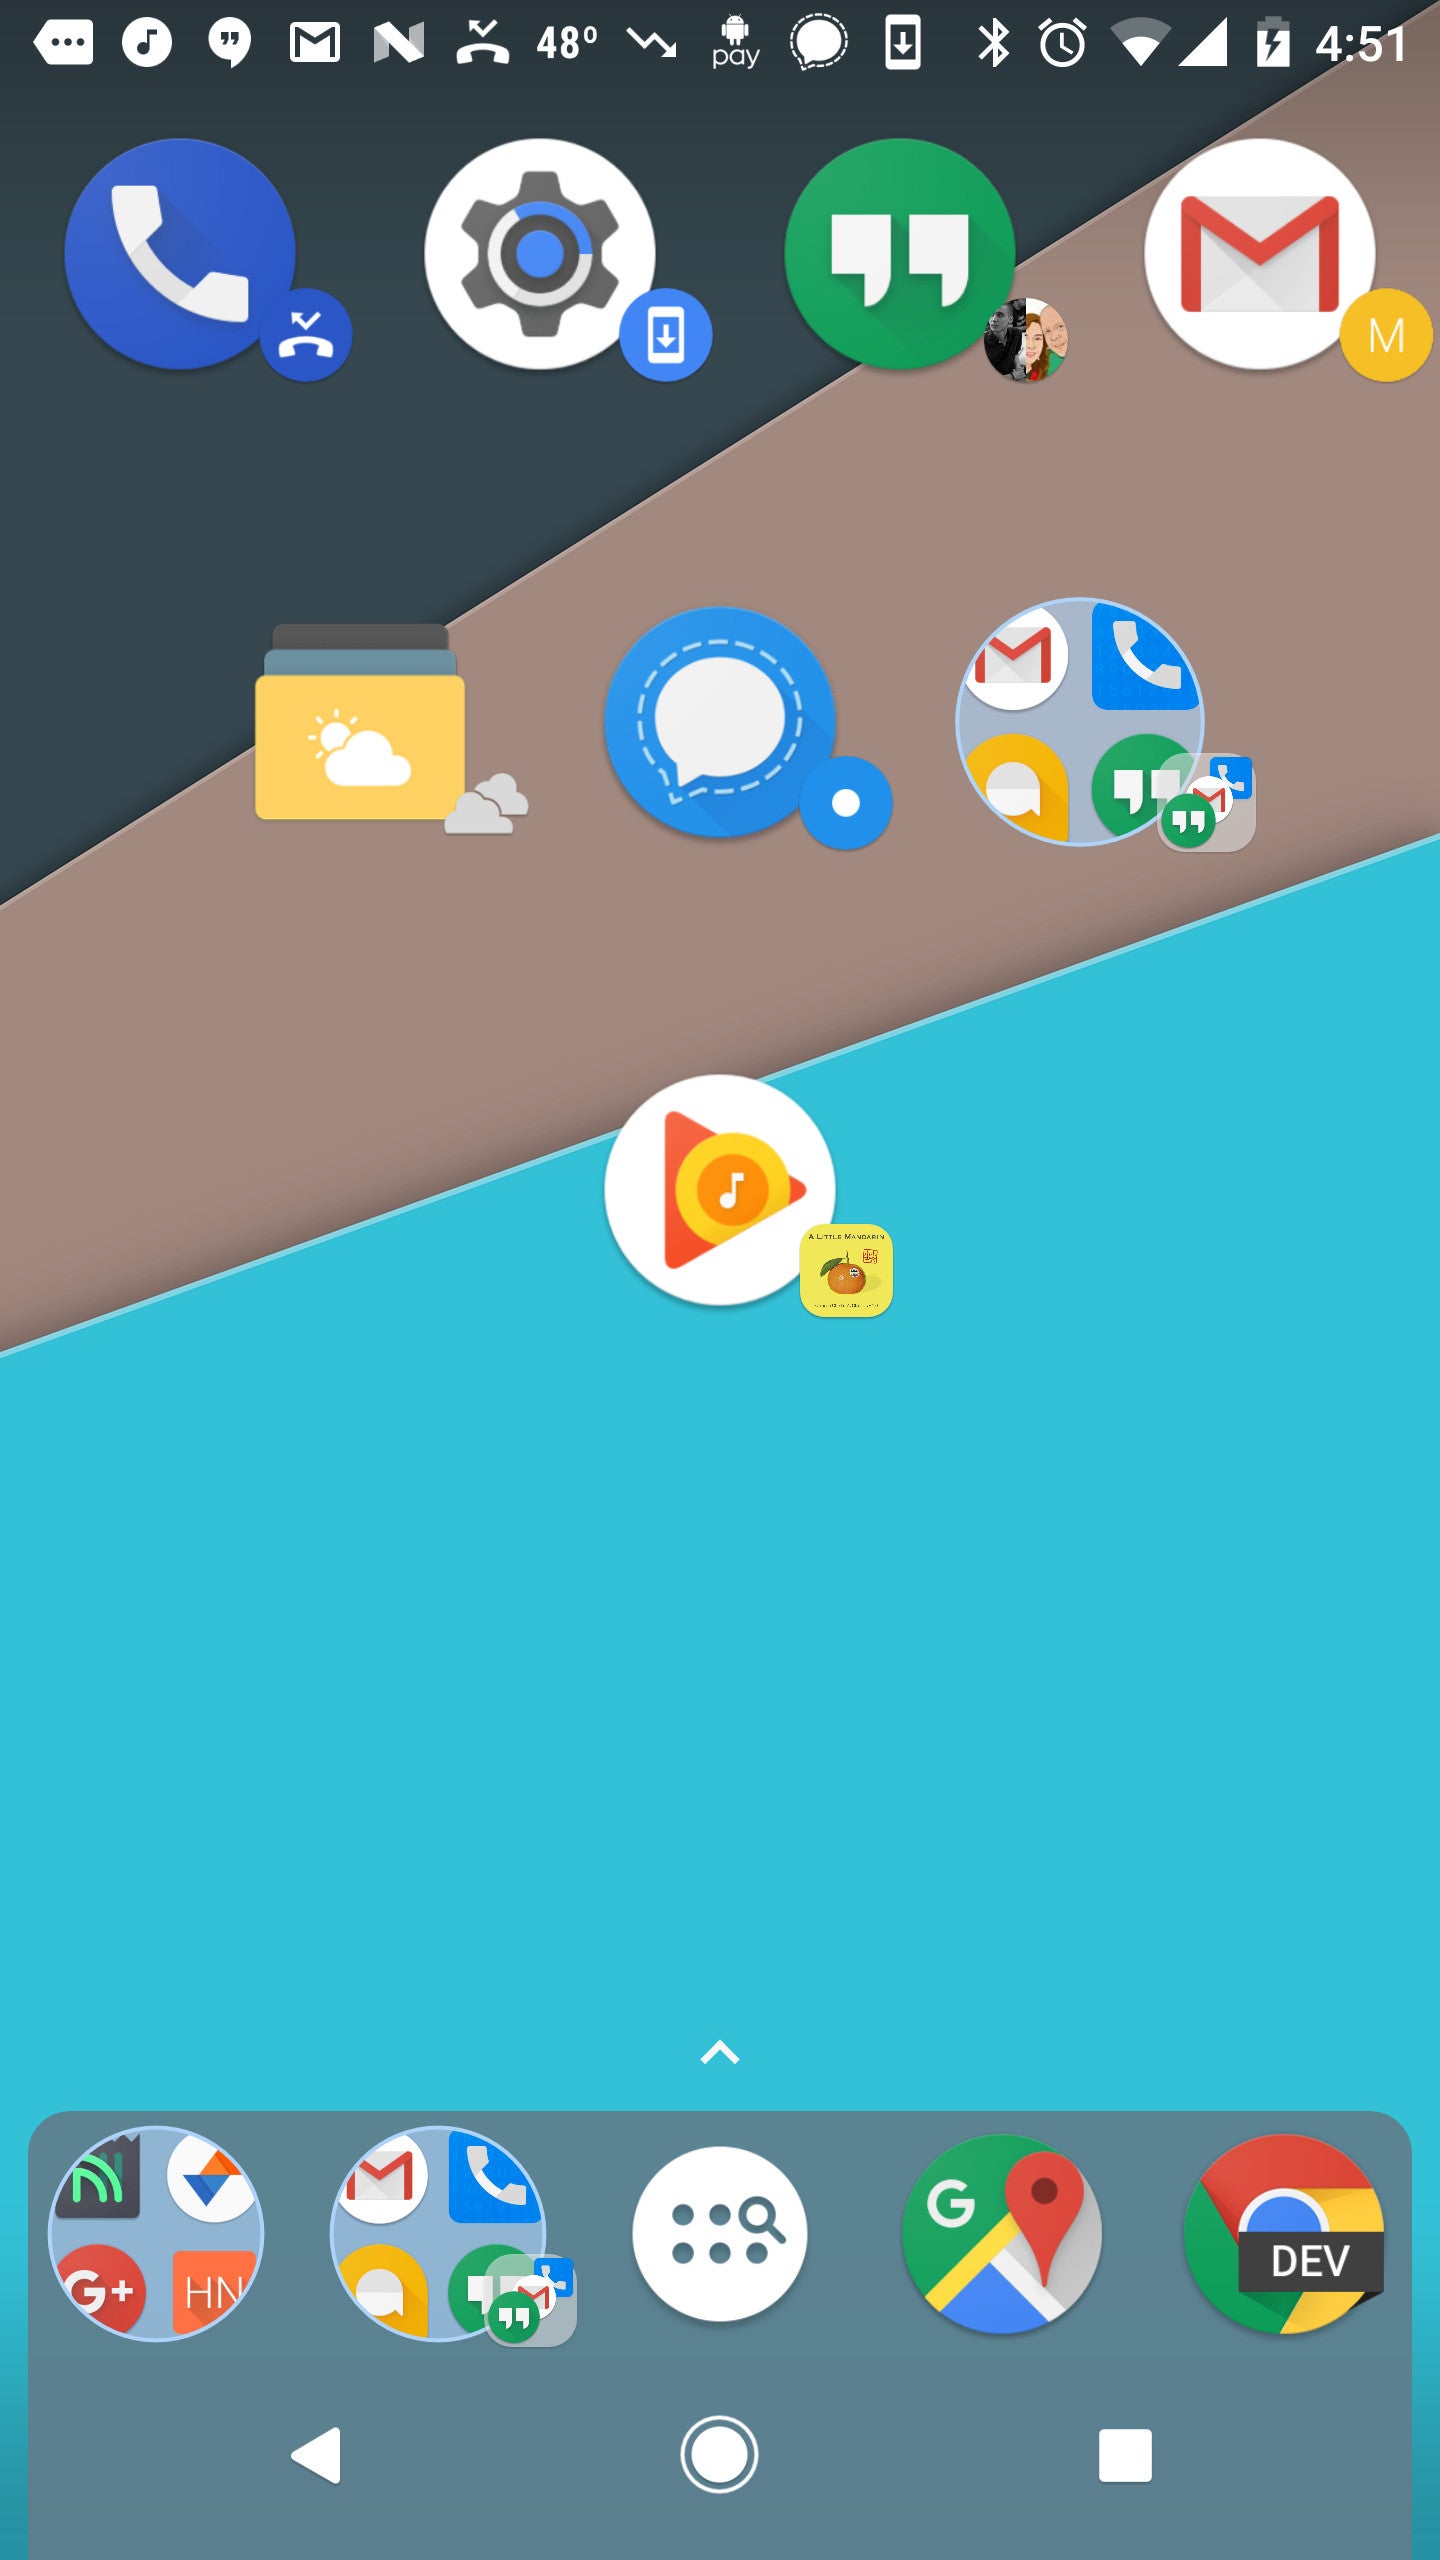 Nova Launcher 5.1 (beta) released with Dynamic Badges, small improvements